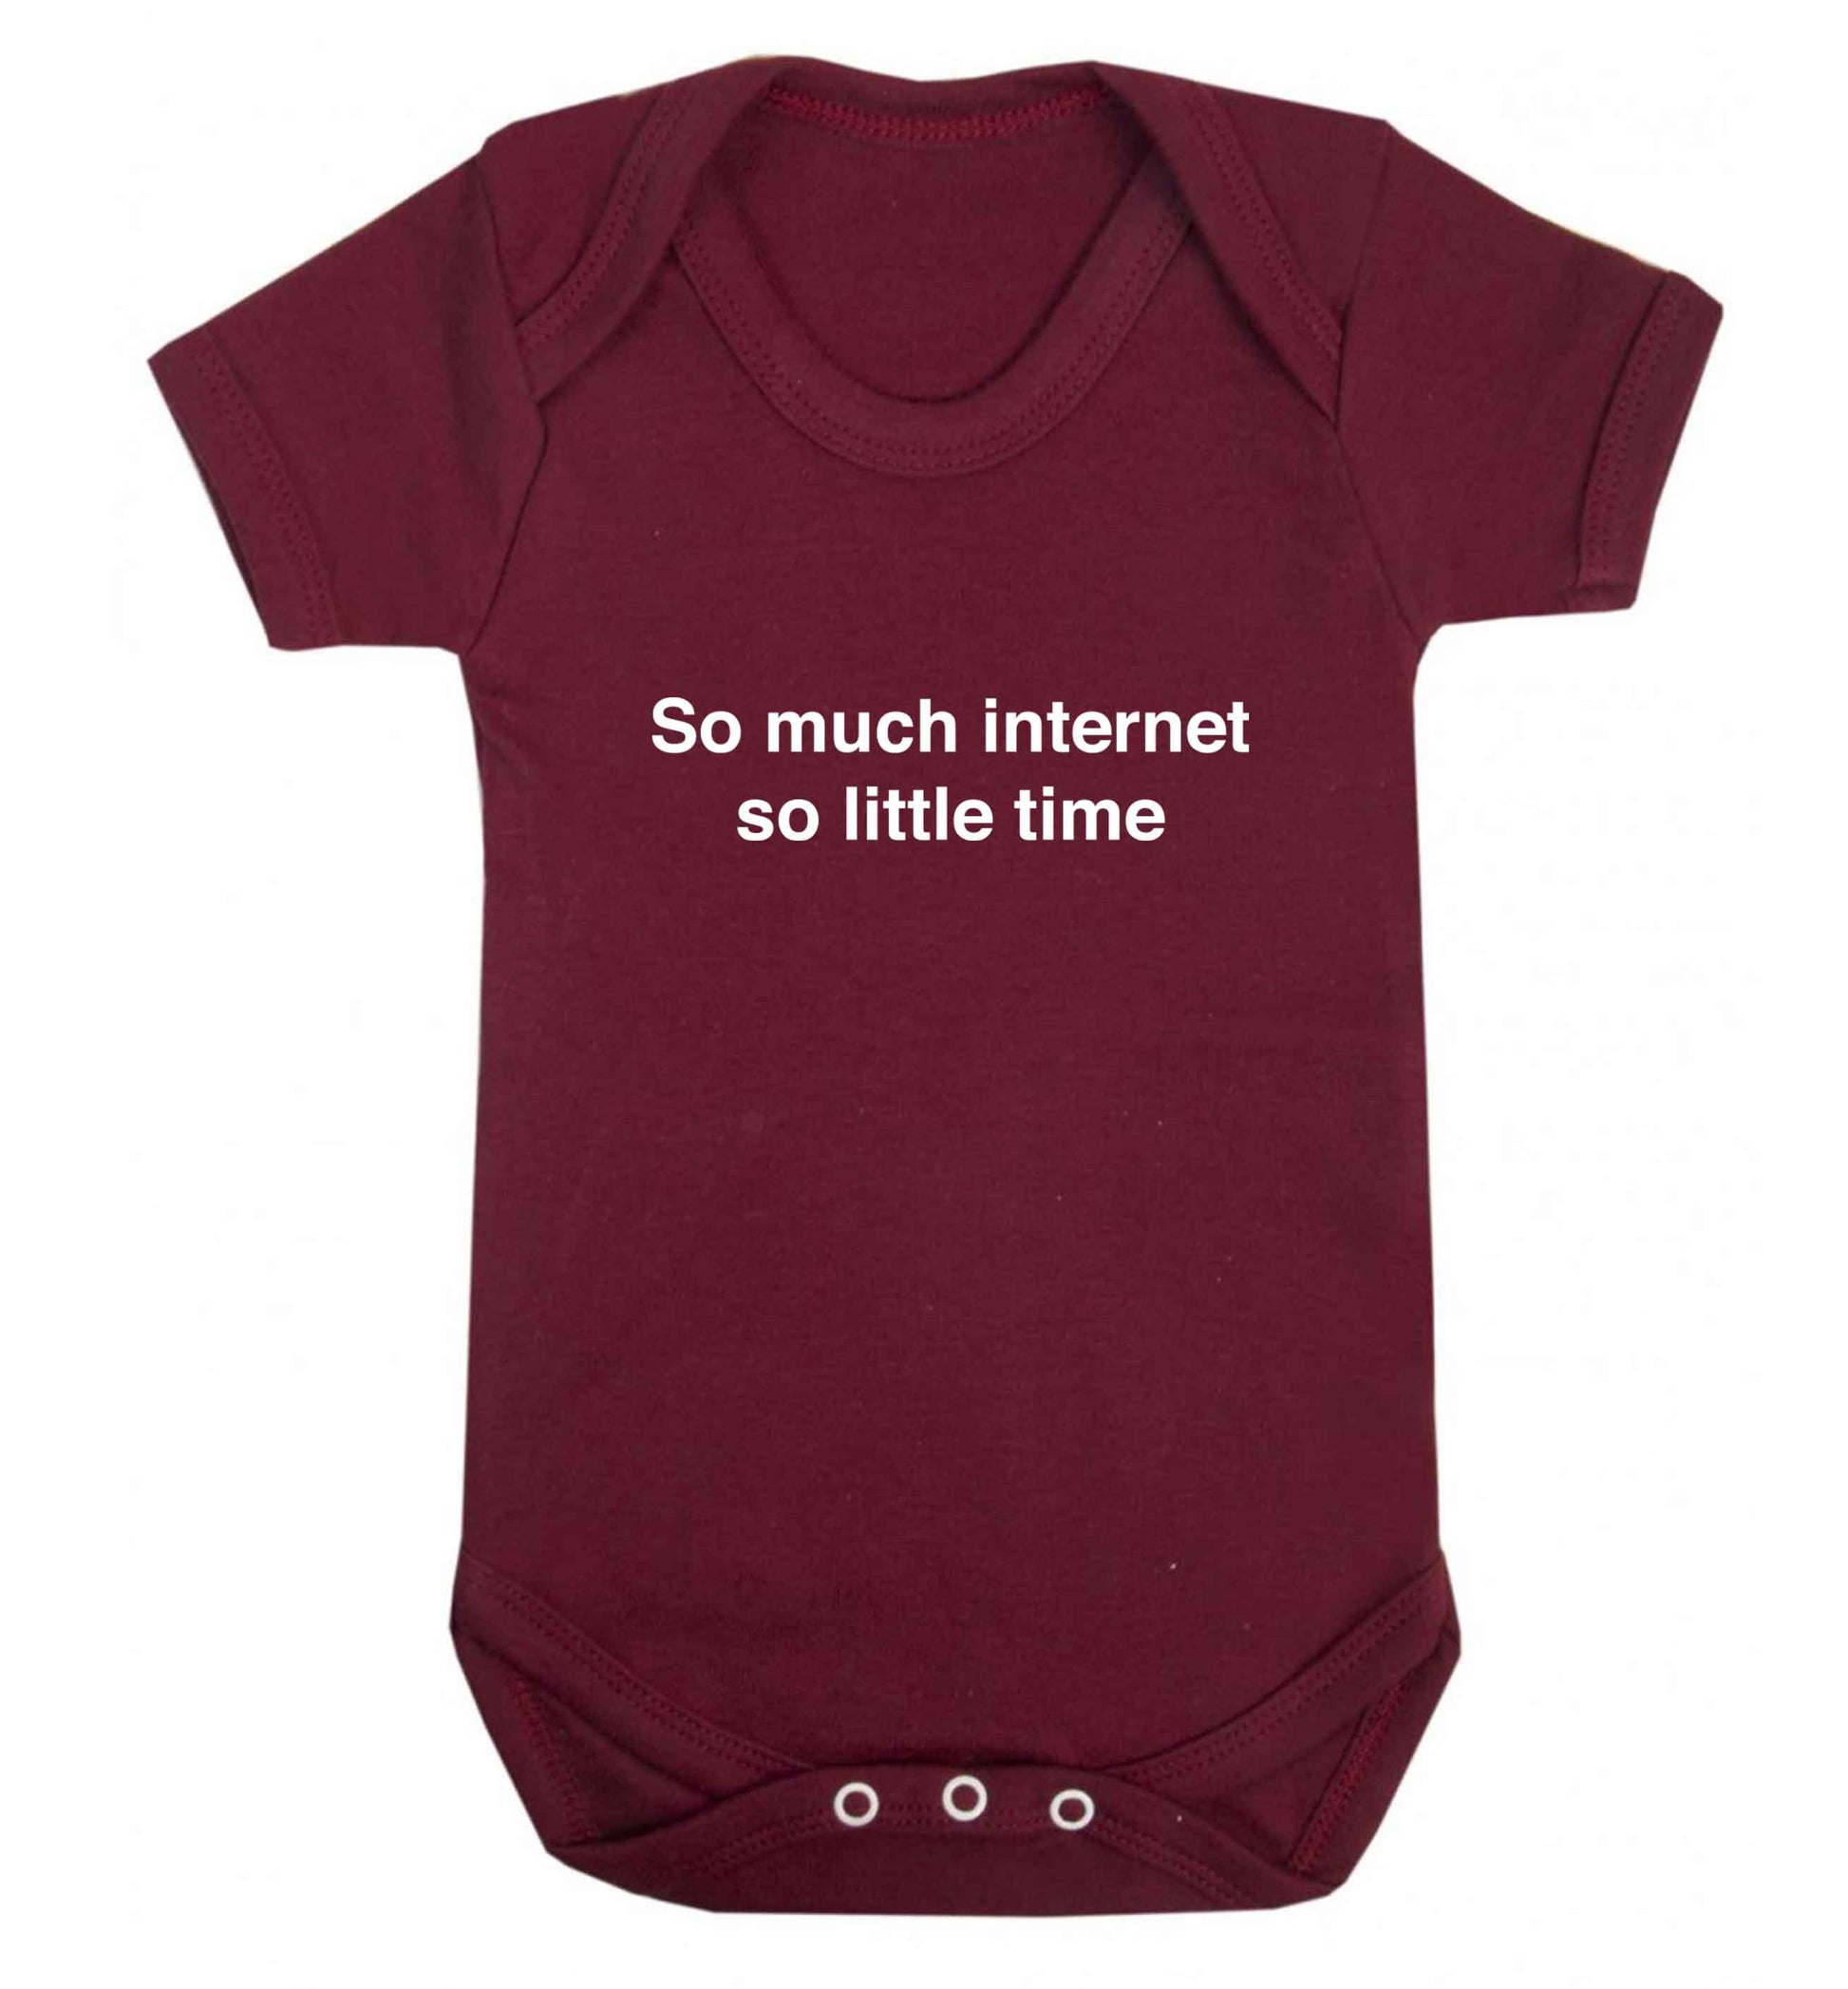 So much internet so little time baby vest maroon 18-24 months